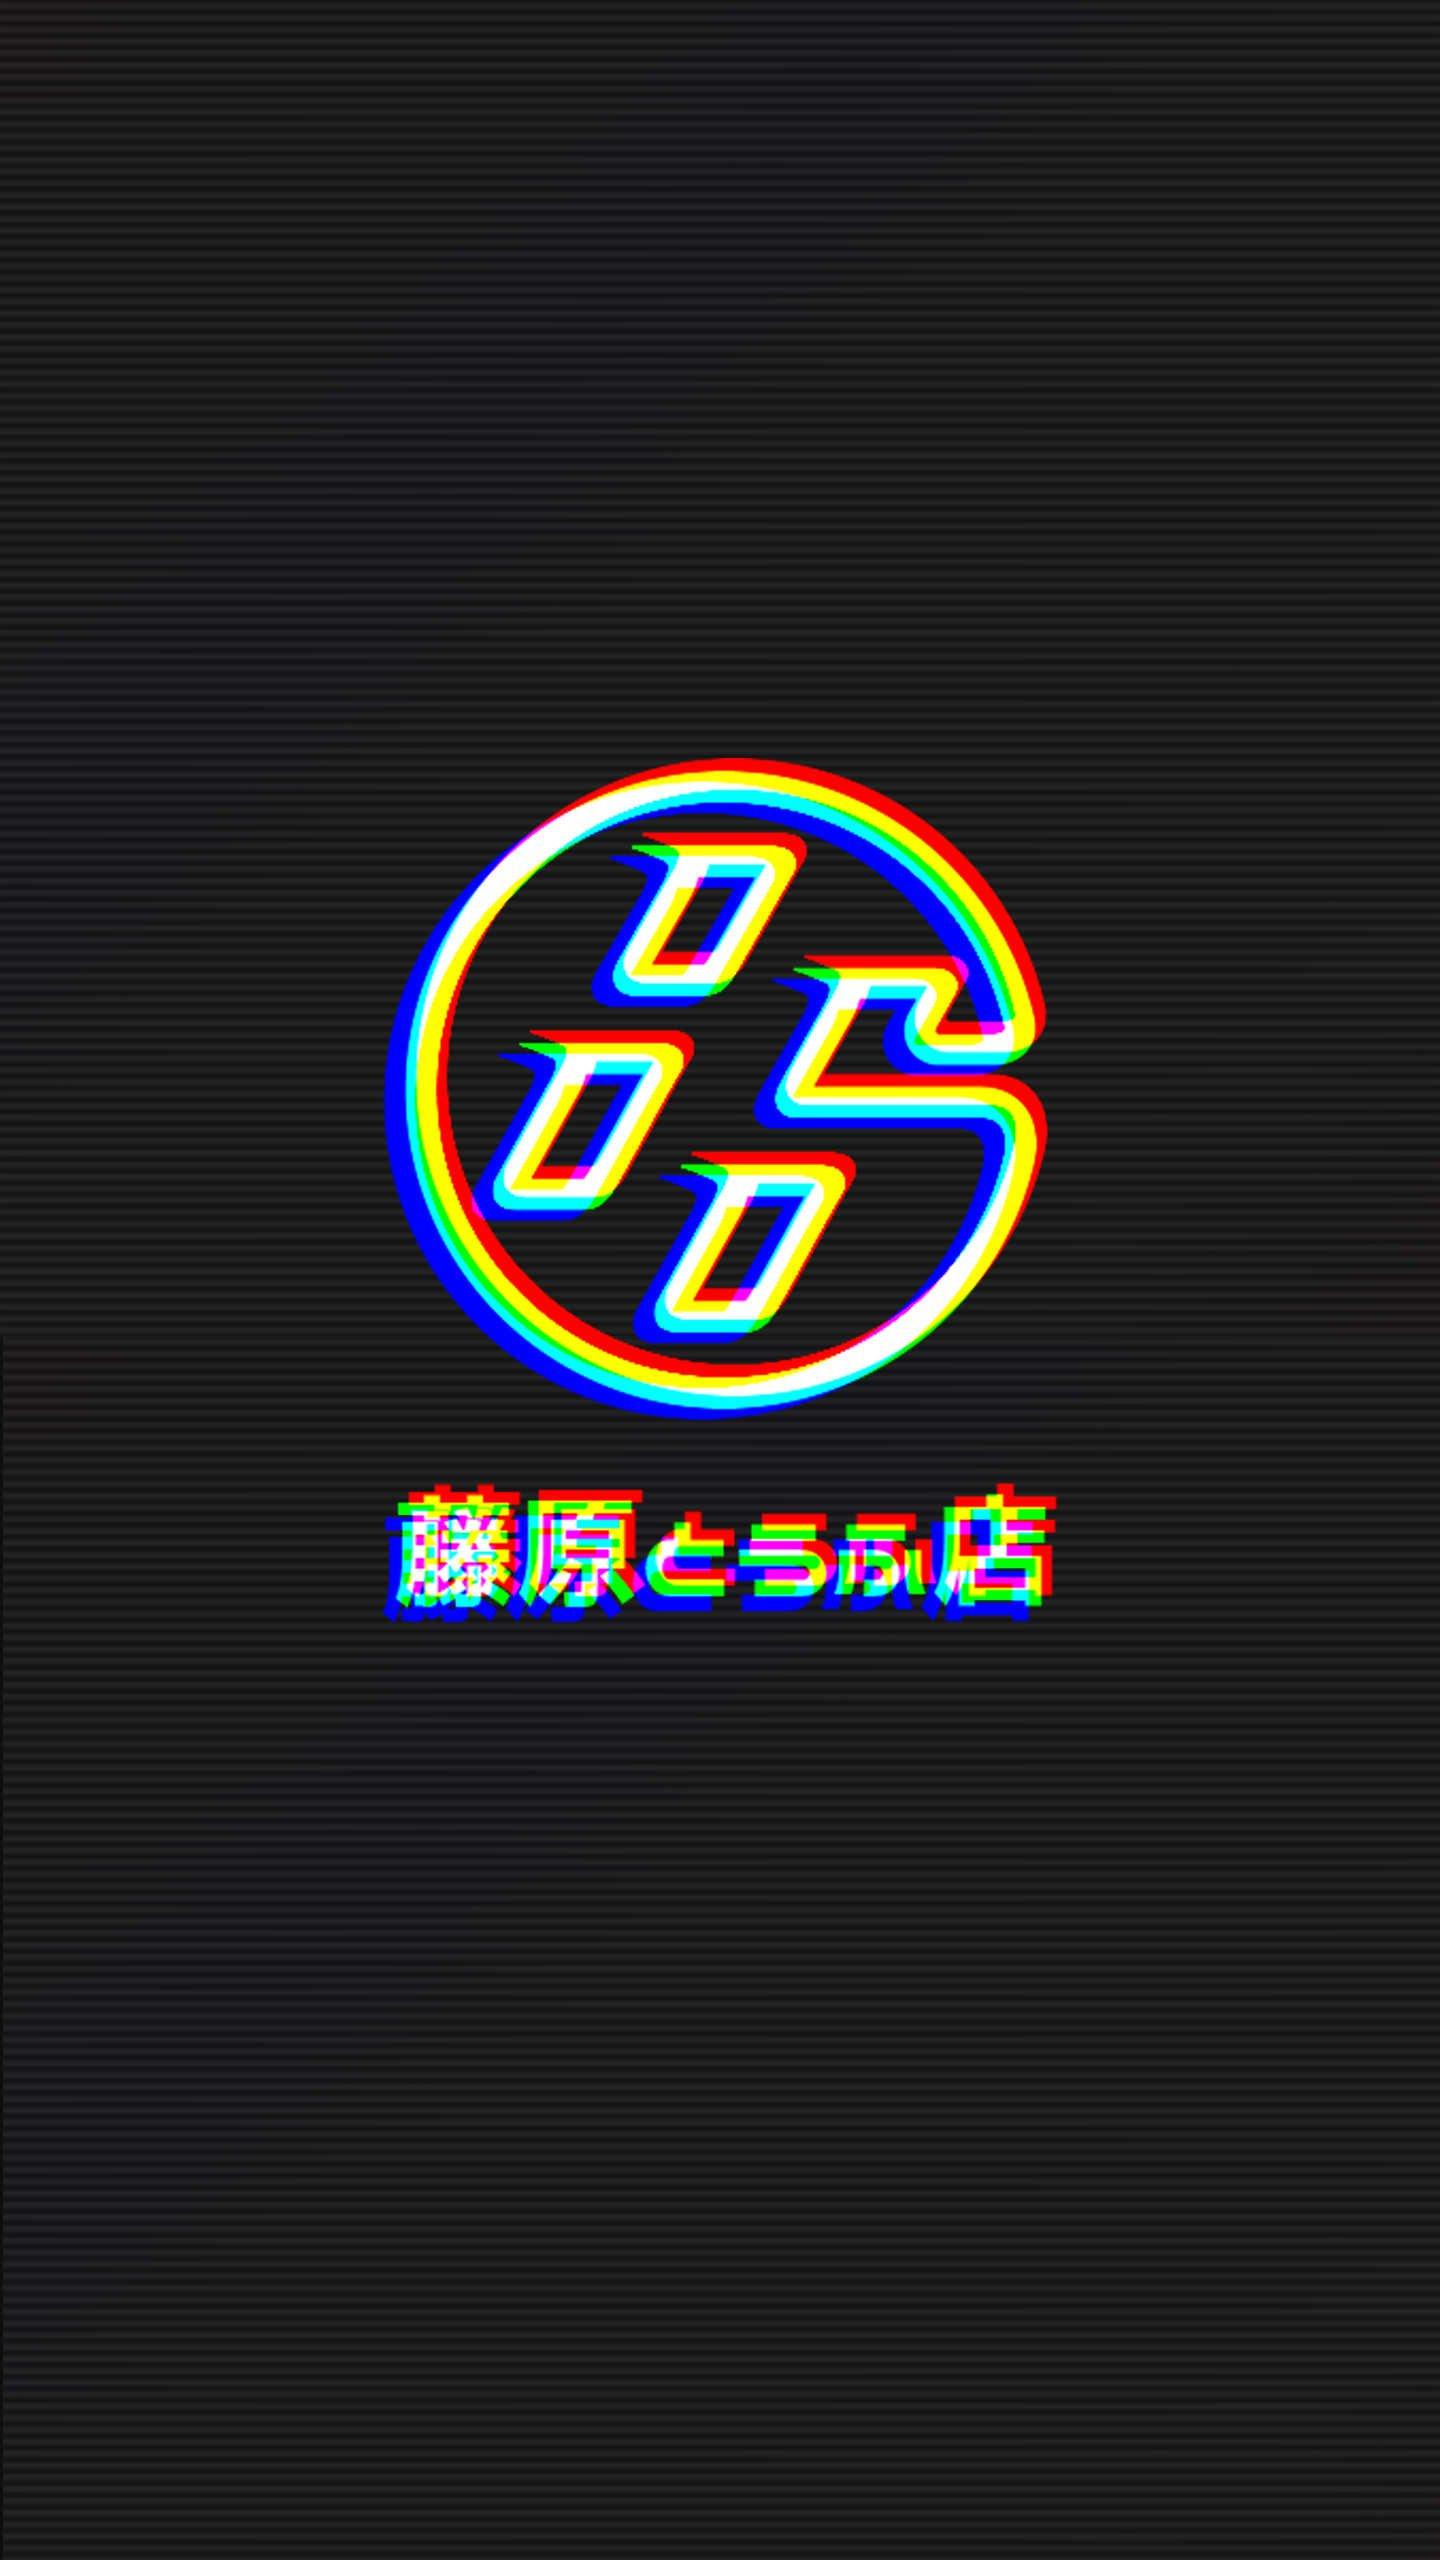 Created a phone wallpapers for my own personal use that you guys might enjoy as well : ft86